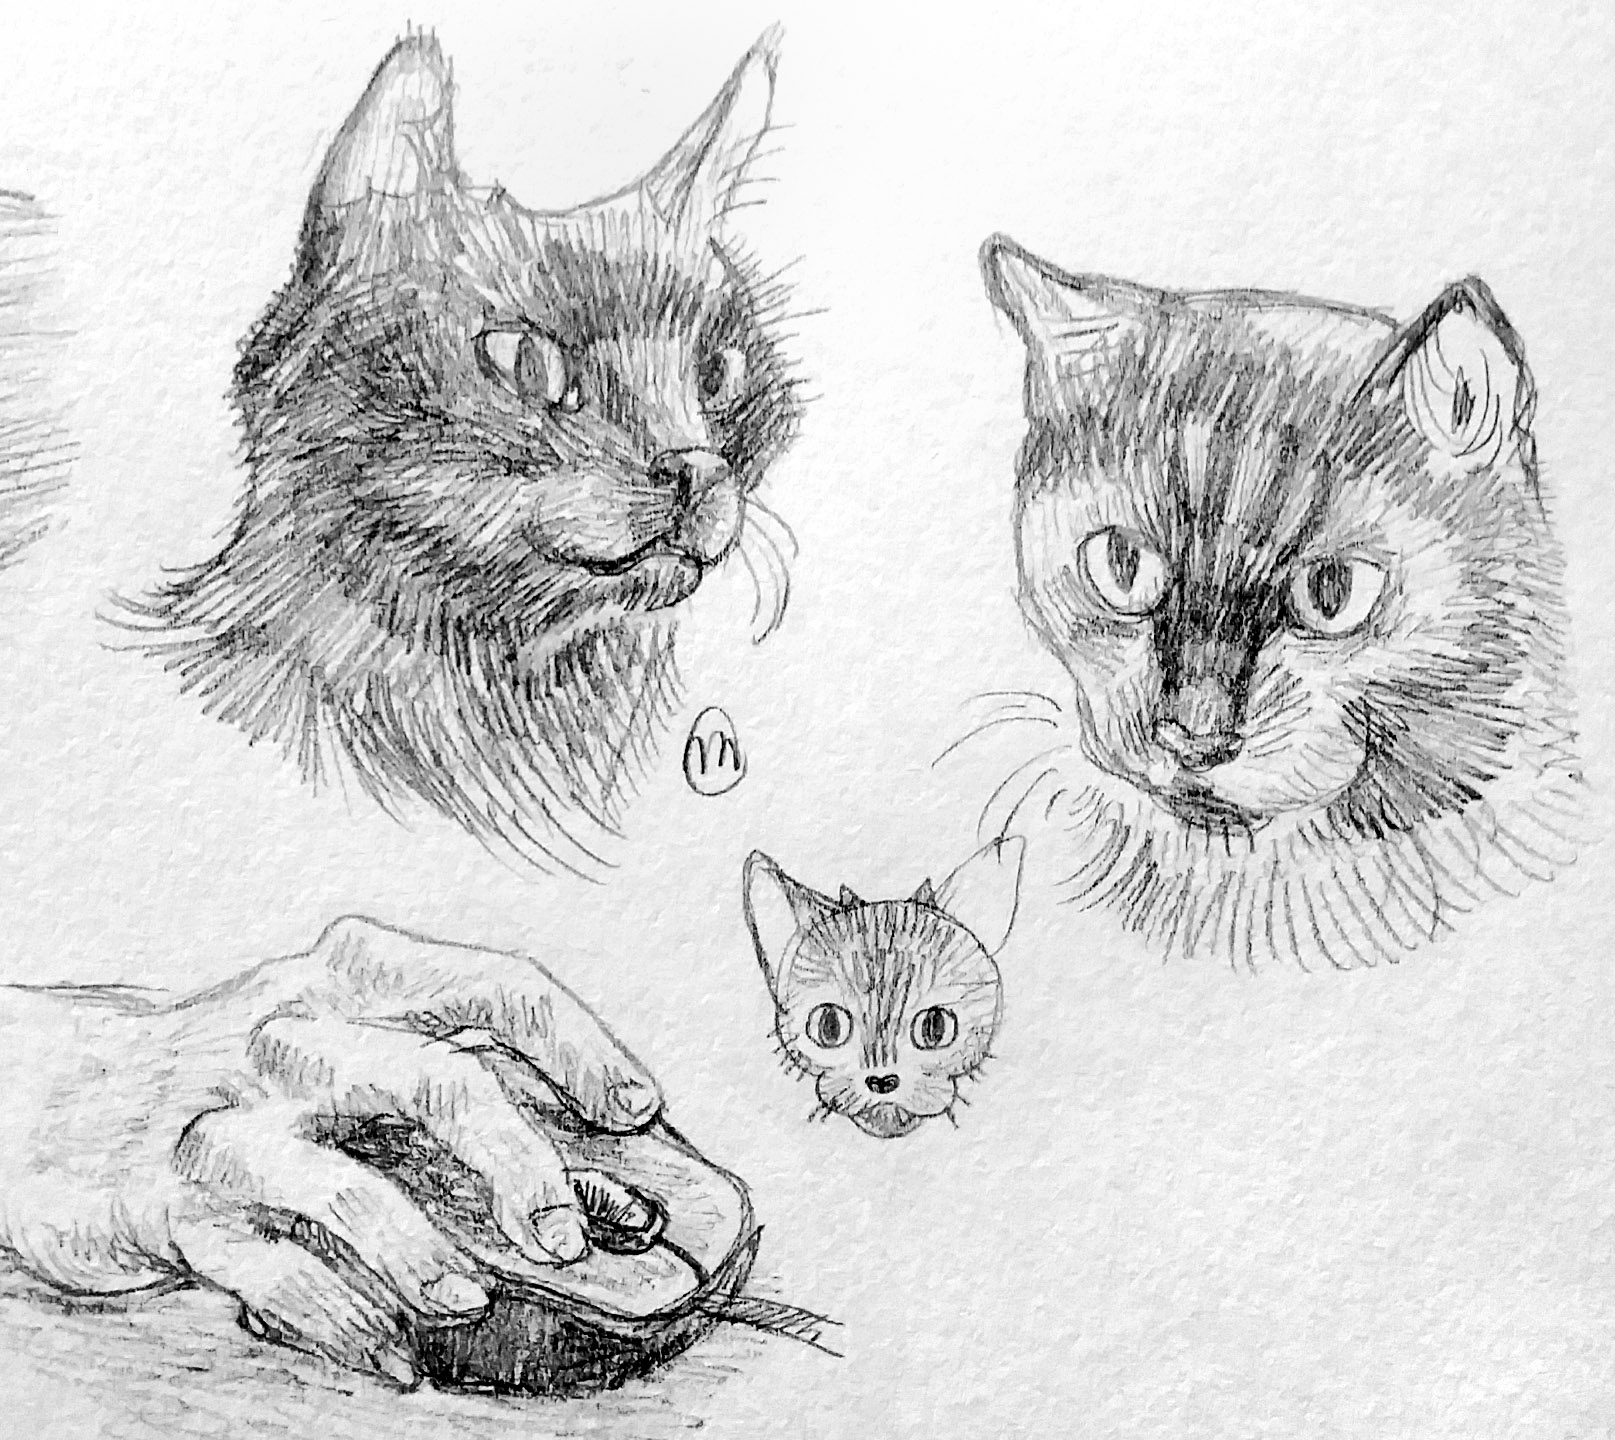 Three drawings of a black cat, and one drawing of a hand on a computer mouse.